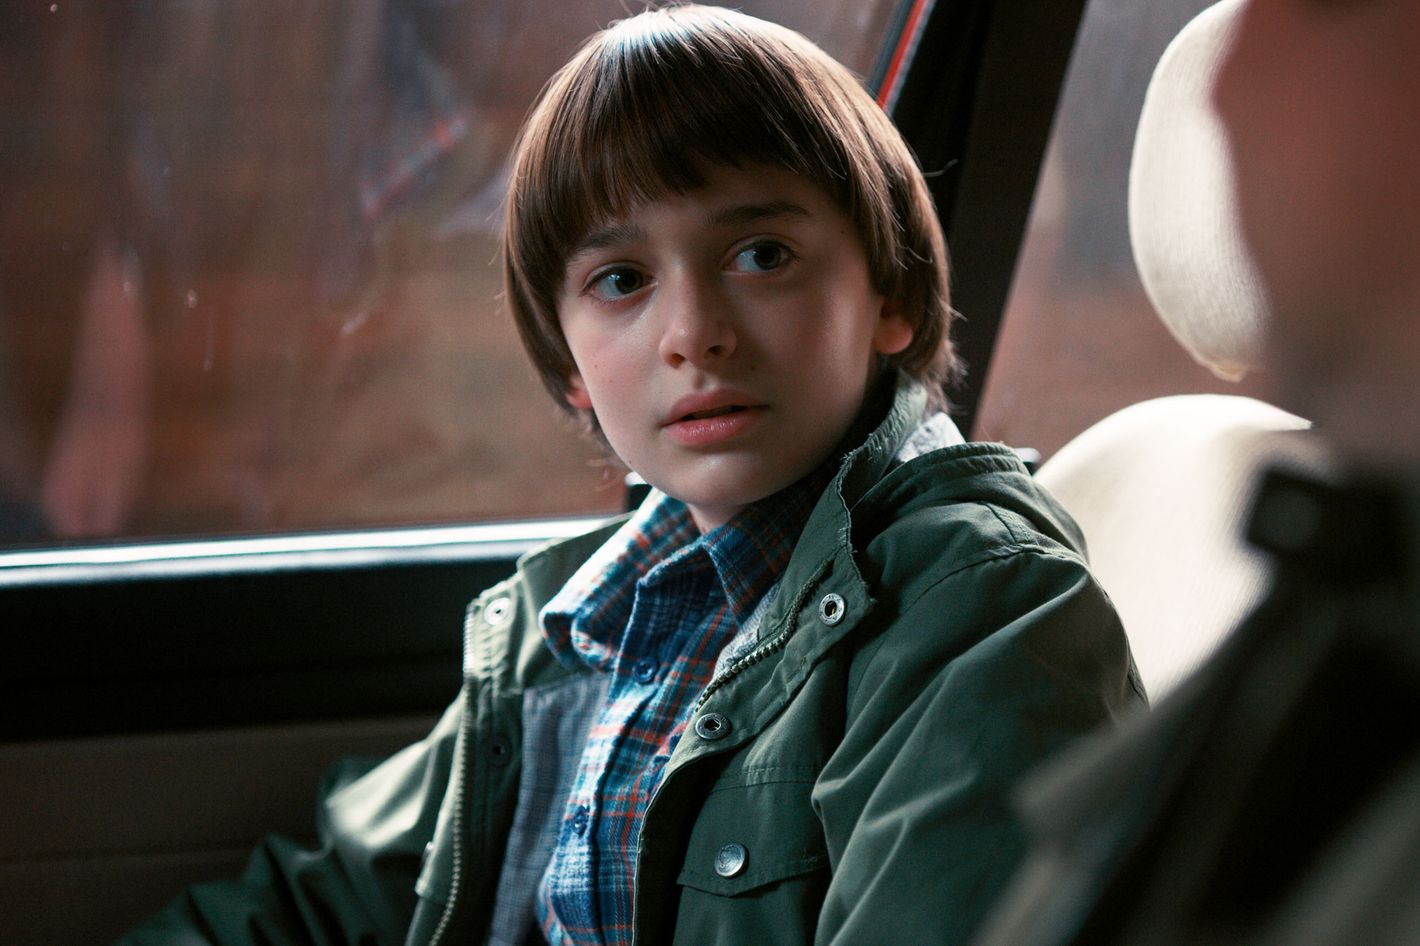 Why is 'Will Byers missing' trending? Stranger Things Day